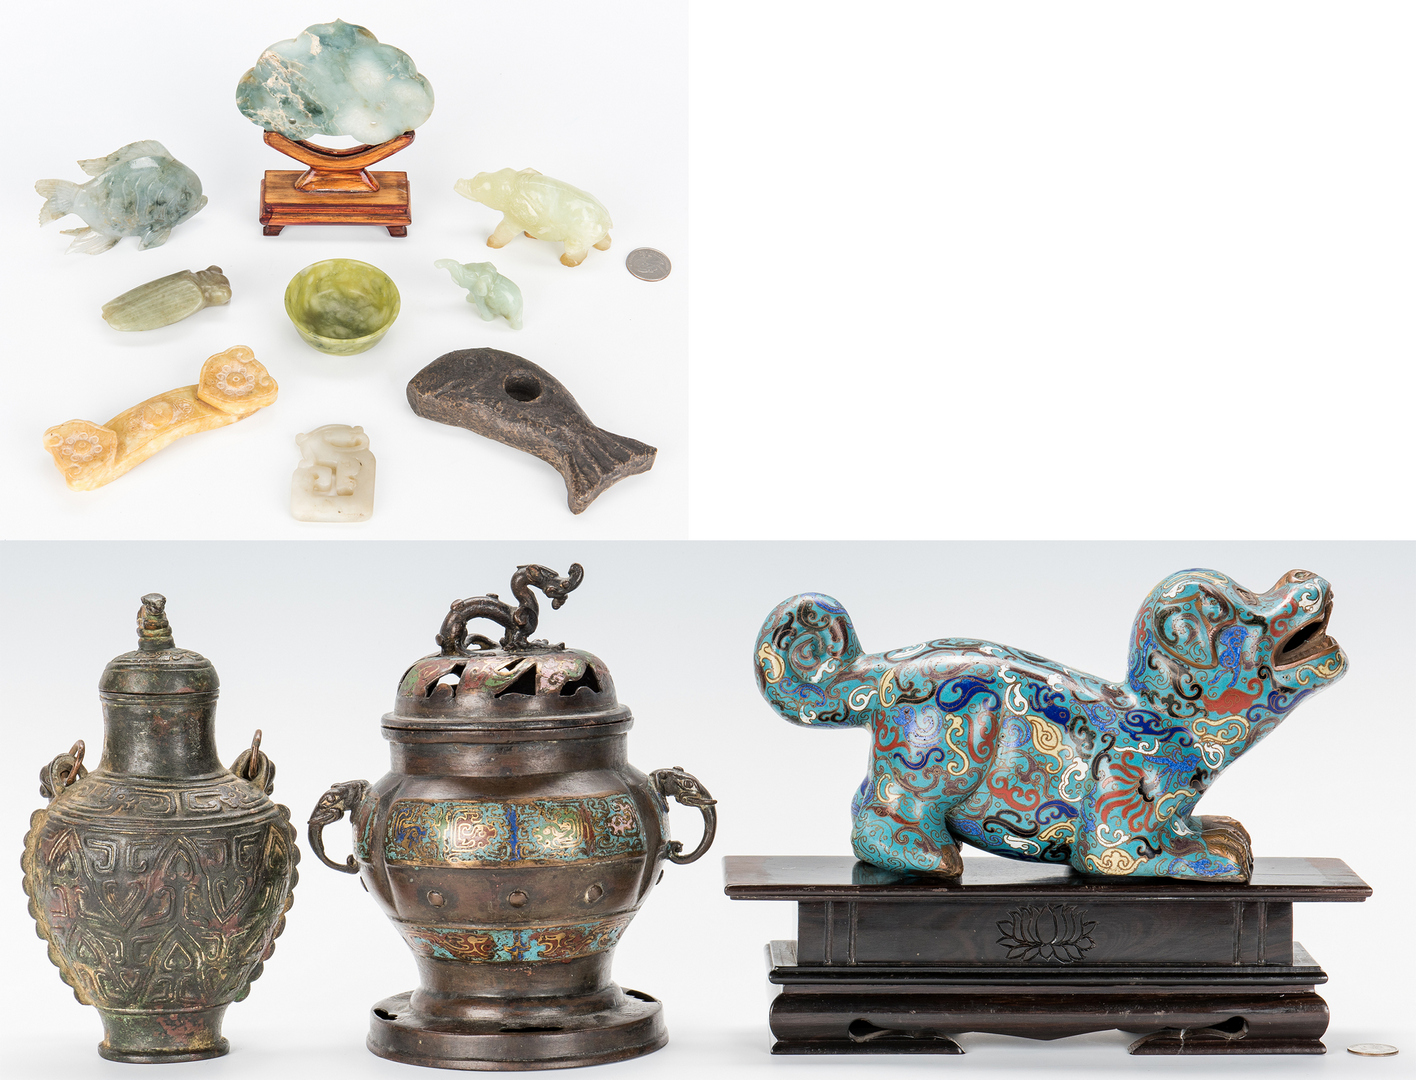 Lot 493: 3 Chinese Bronze Items, 9 Asian Carved Jade & Hardstone Items, 12 items